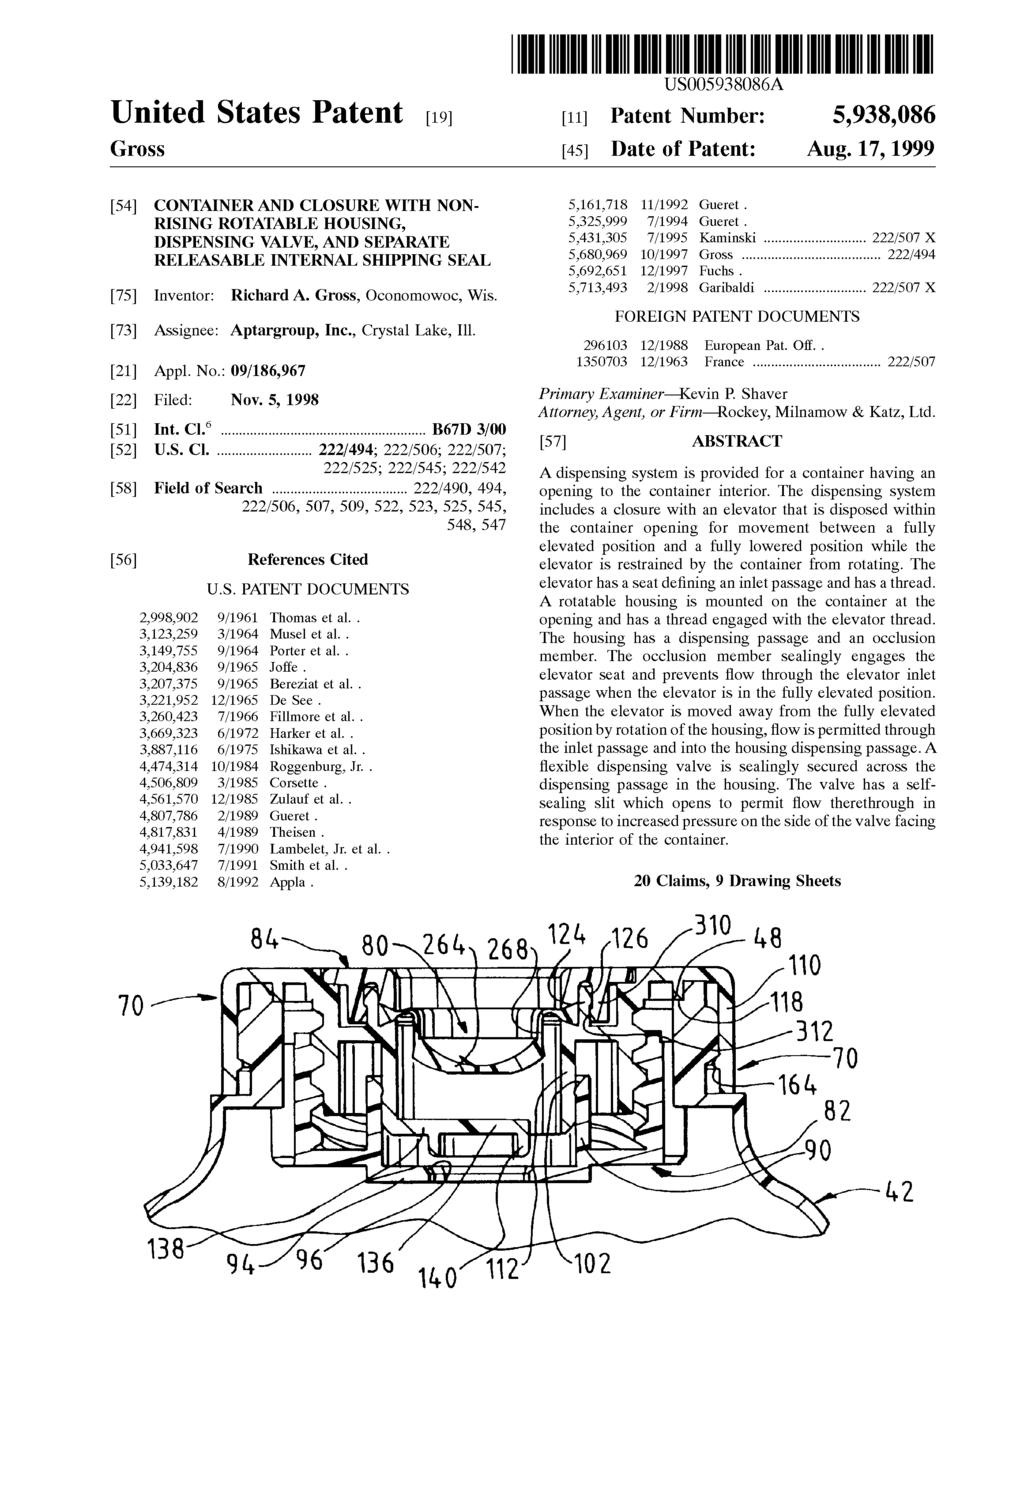 United States Patent (19) Gross 54 CONTAINER AND CLOSURE WITH NON RISING ROTATABLE HOUSING, DISPENSING VALVE, AND SEPARATE RELEASABLE INTERNAL SHIPPING SEAL Inventor: Richard A.